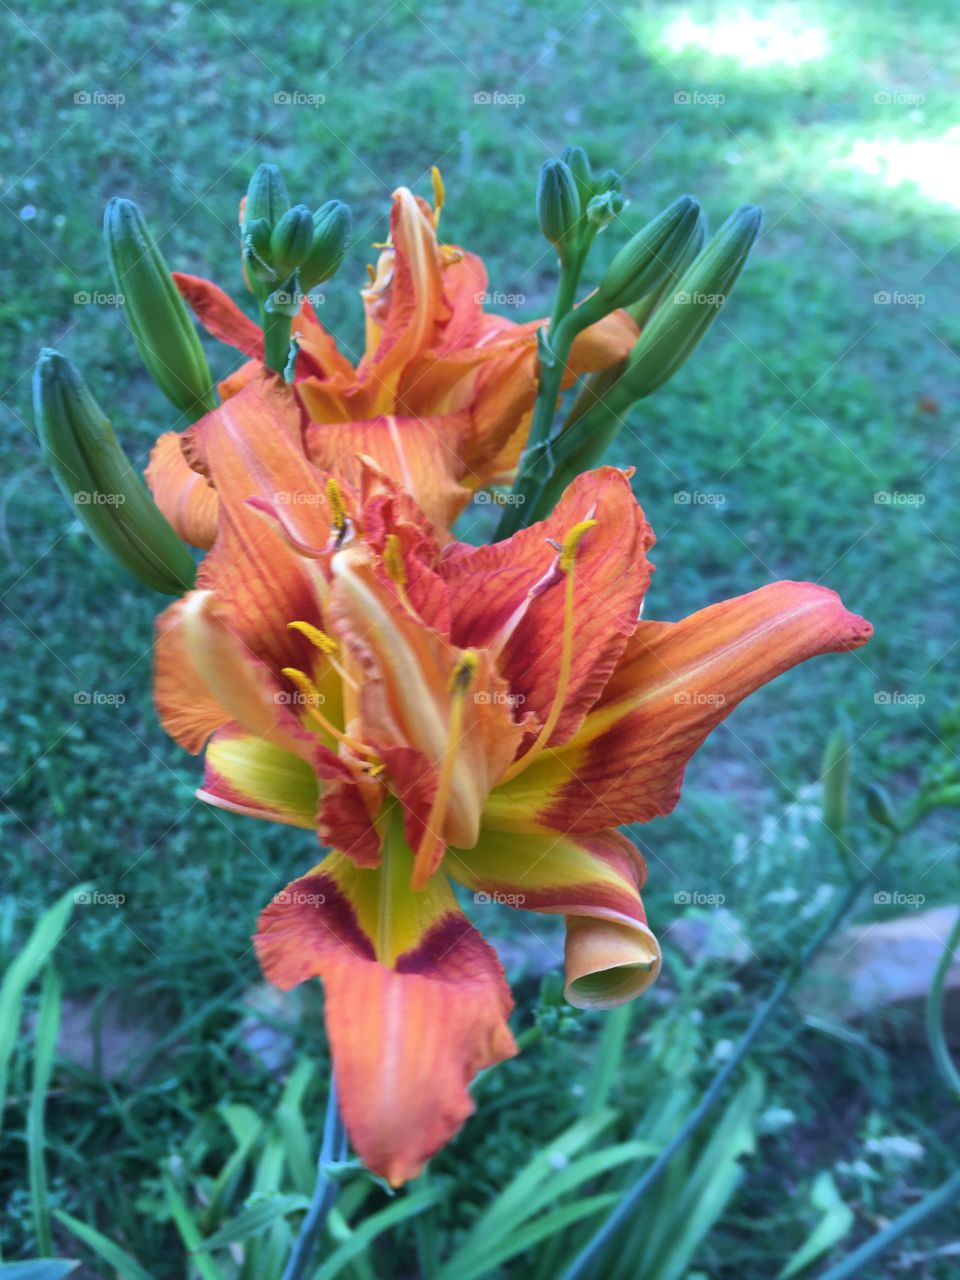 I just love waking up to new blooms my orange day lilies are beginning to open up.